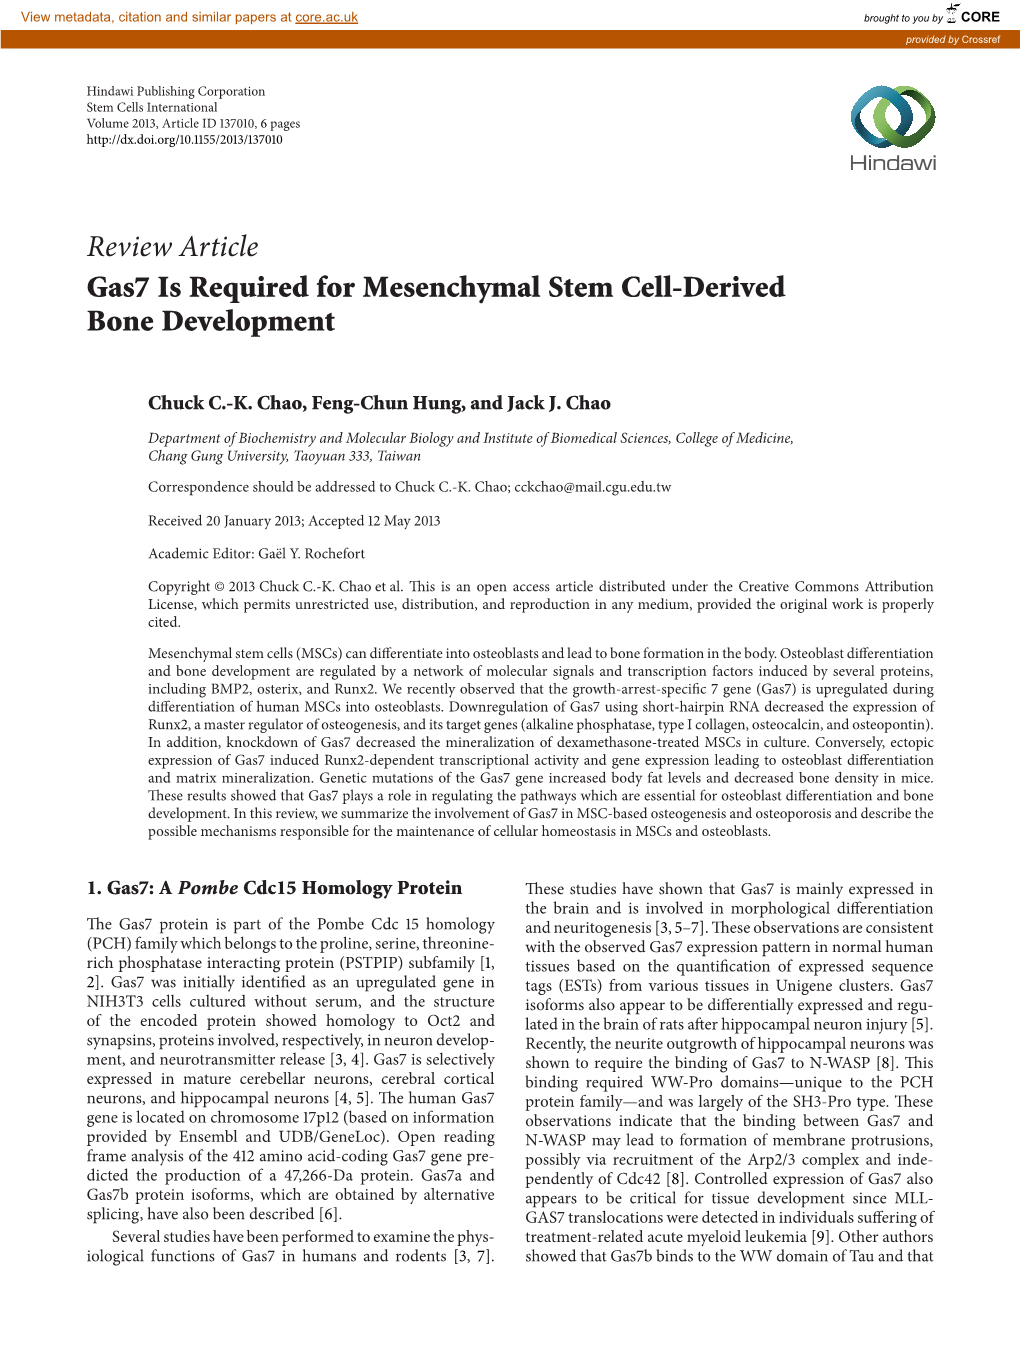 Review Article Gas7 Is Required for Mesenchymal Stem Cell-Derived Bone Development